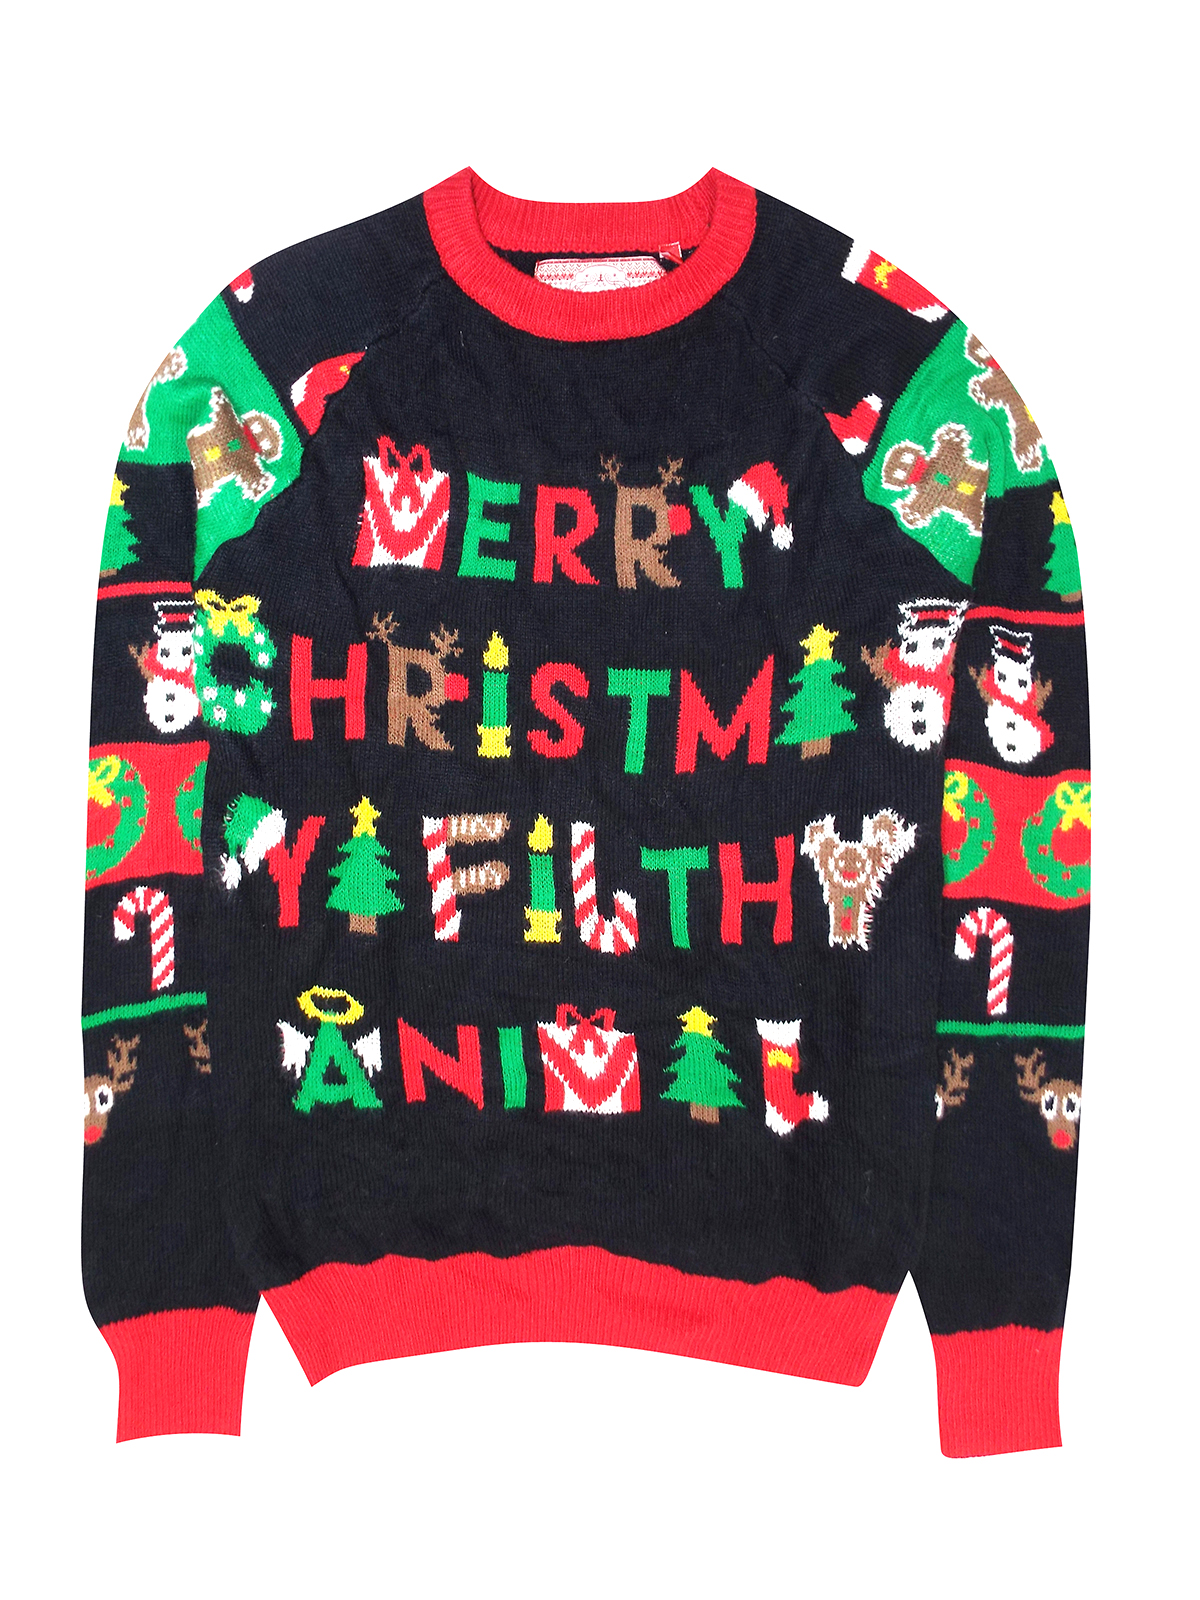 Kesis - - Kesis ASSORTED Mens Knitted Christmas Jumpers - Size Large to 2XL